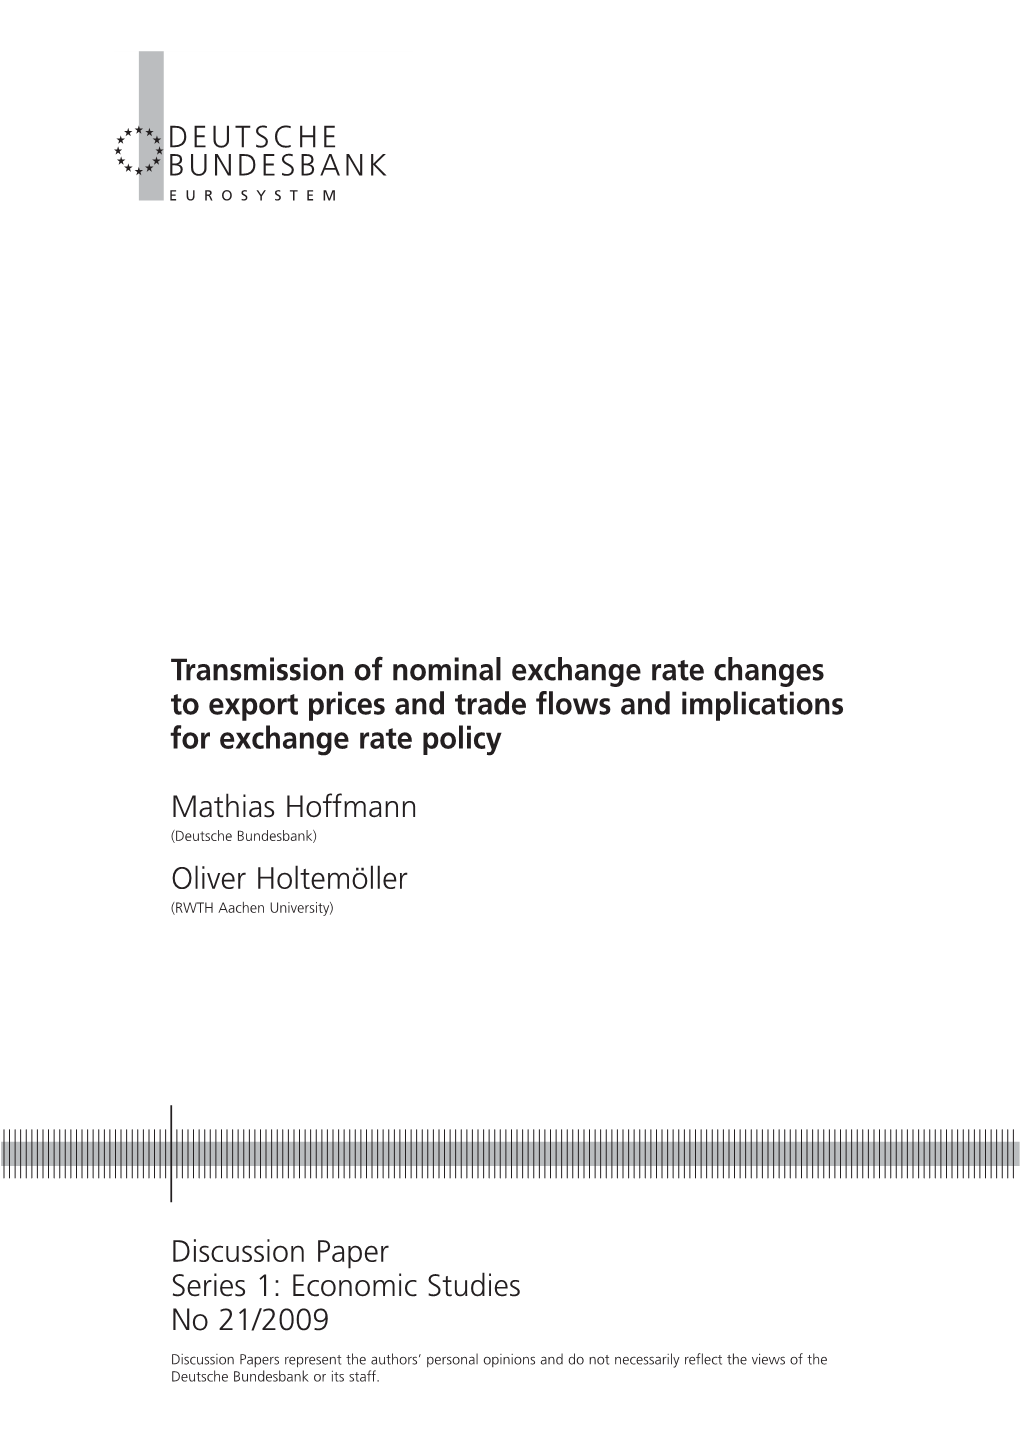 Transmission of Nominal Exchange Rate Changes to Export Prices and Trade Flows and Implications for Exchange Rate Policy